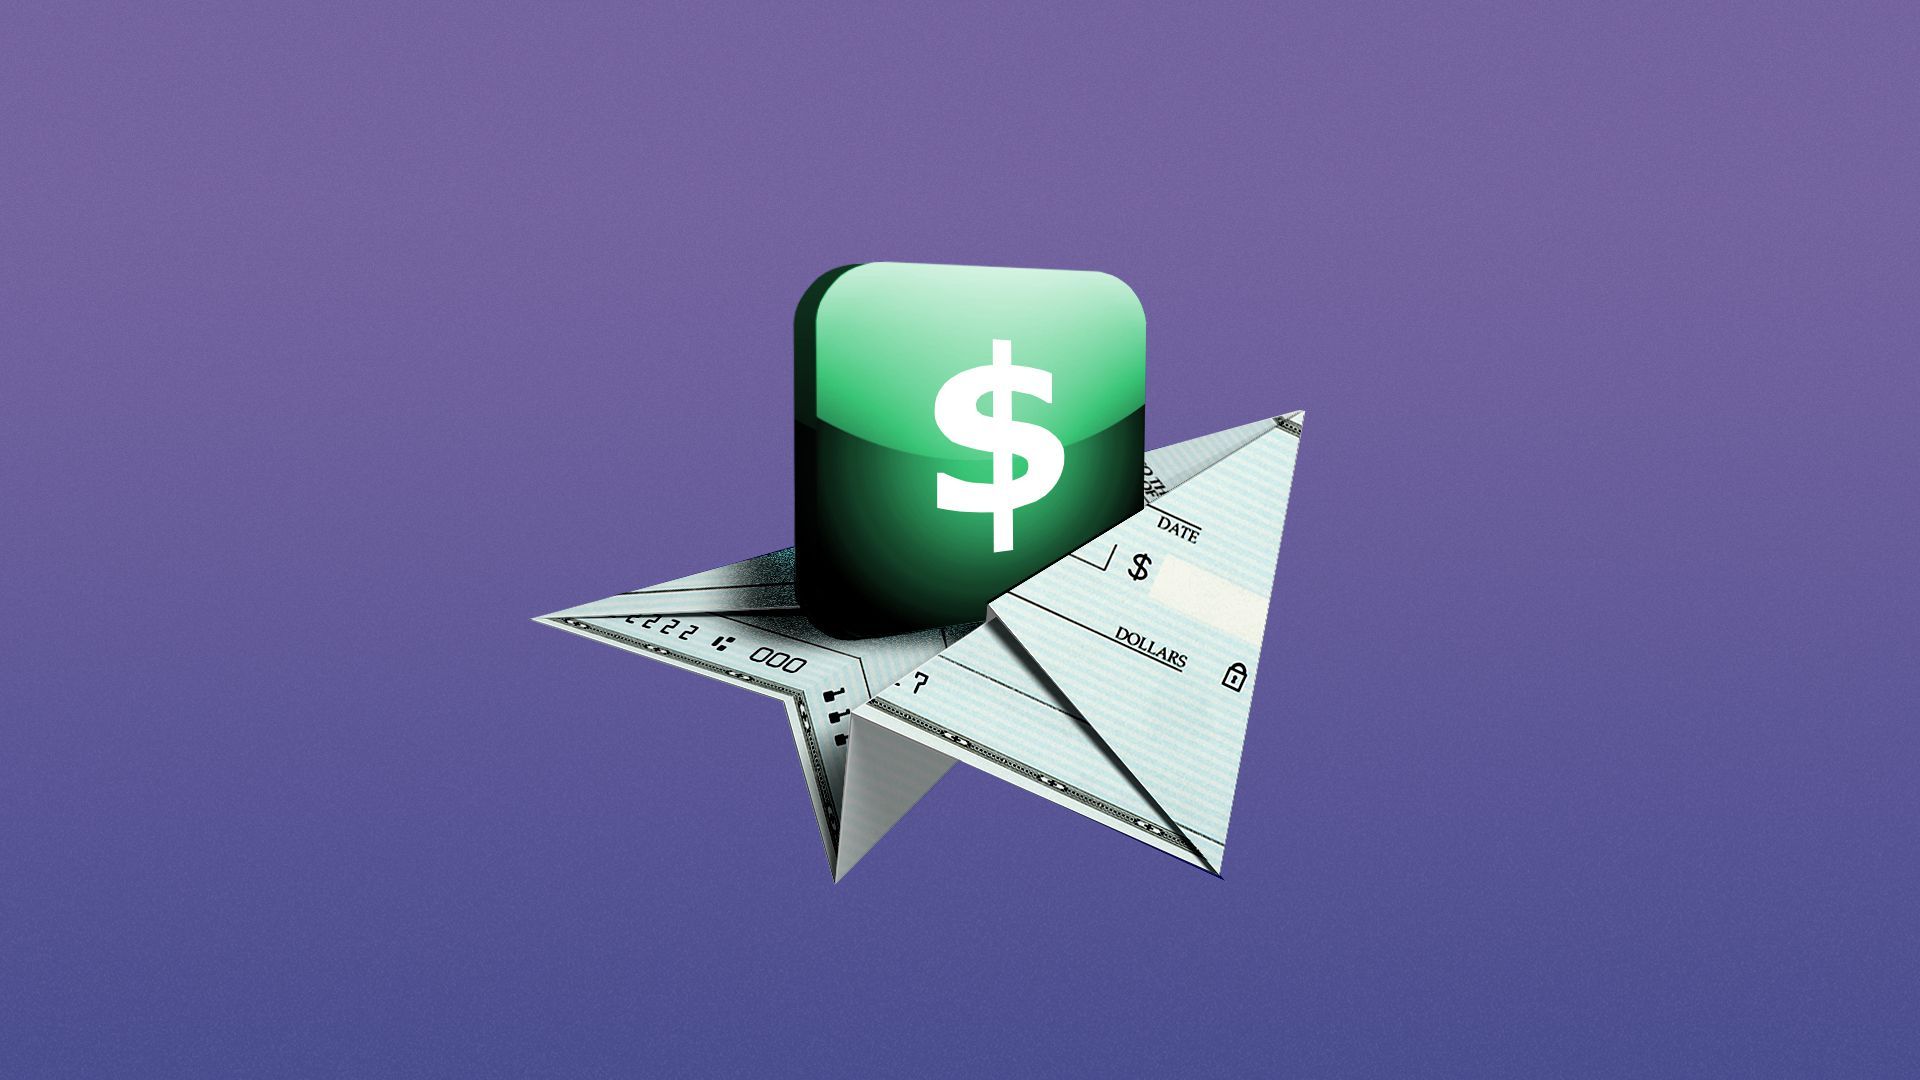 Illustration of a check folded into a paper airplane carrying an app button